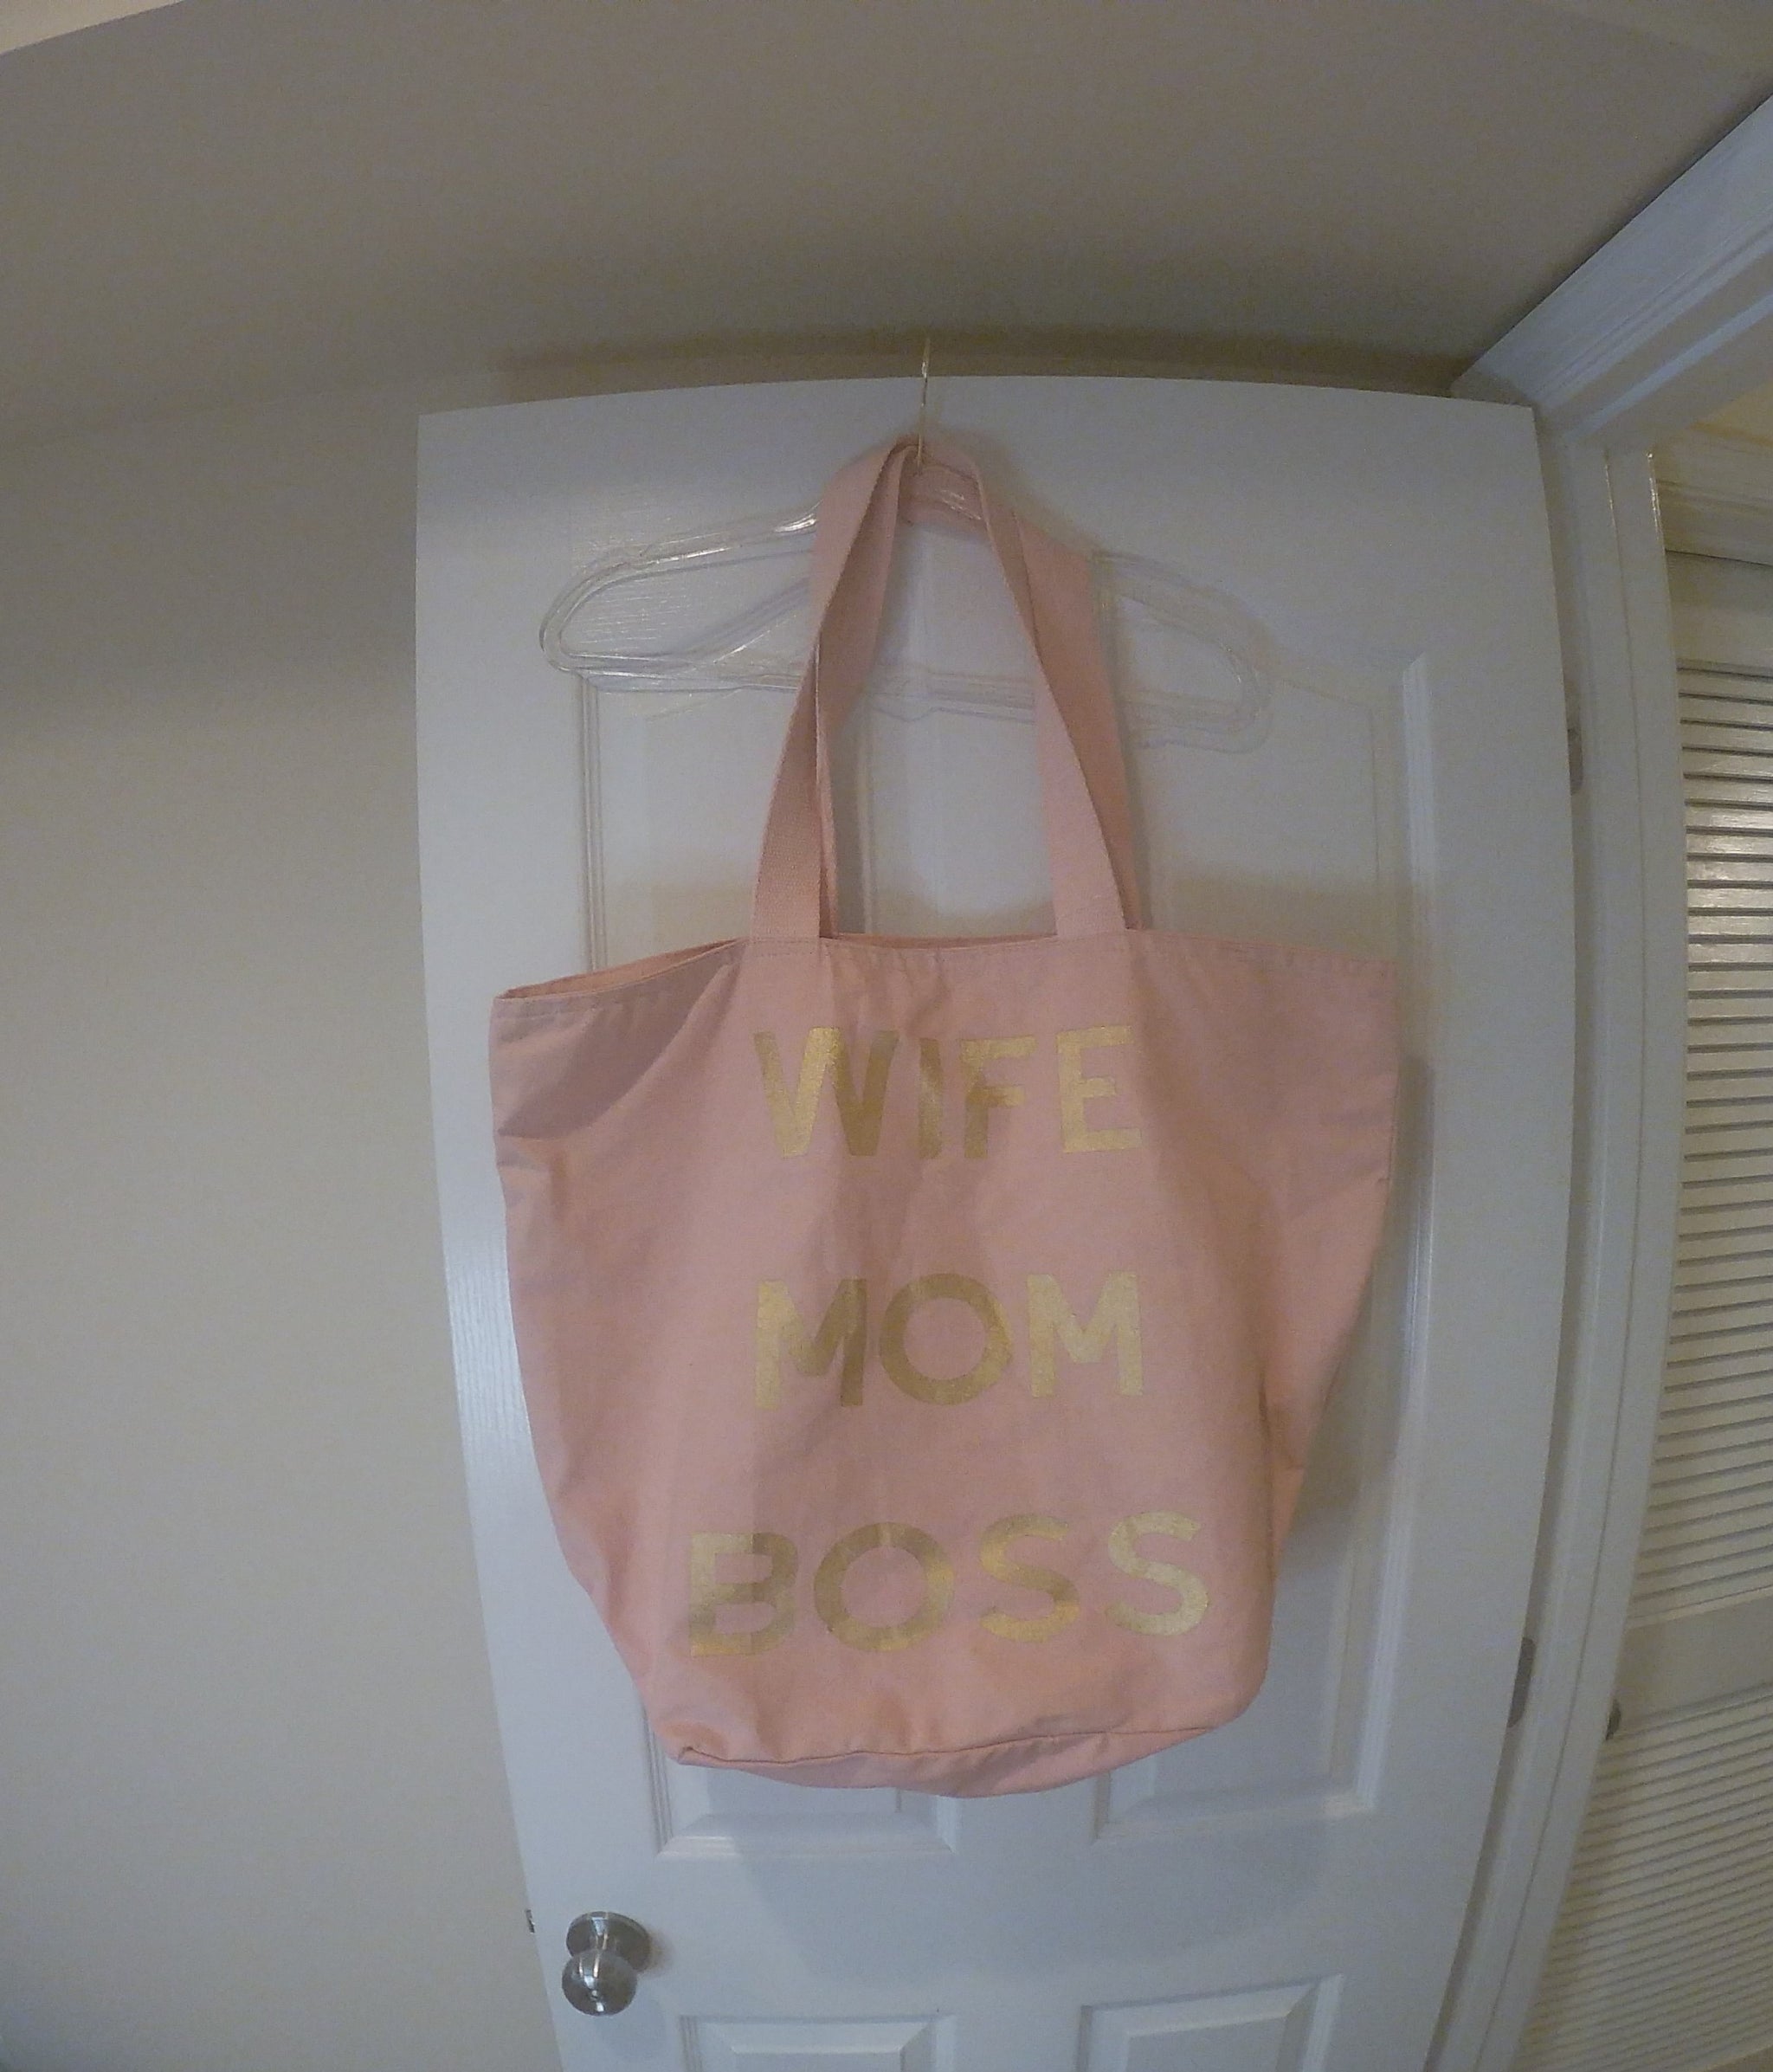 Victoria Secret One Size Tote Bag Purse Beige And Pink - beyond